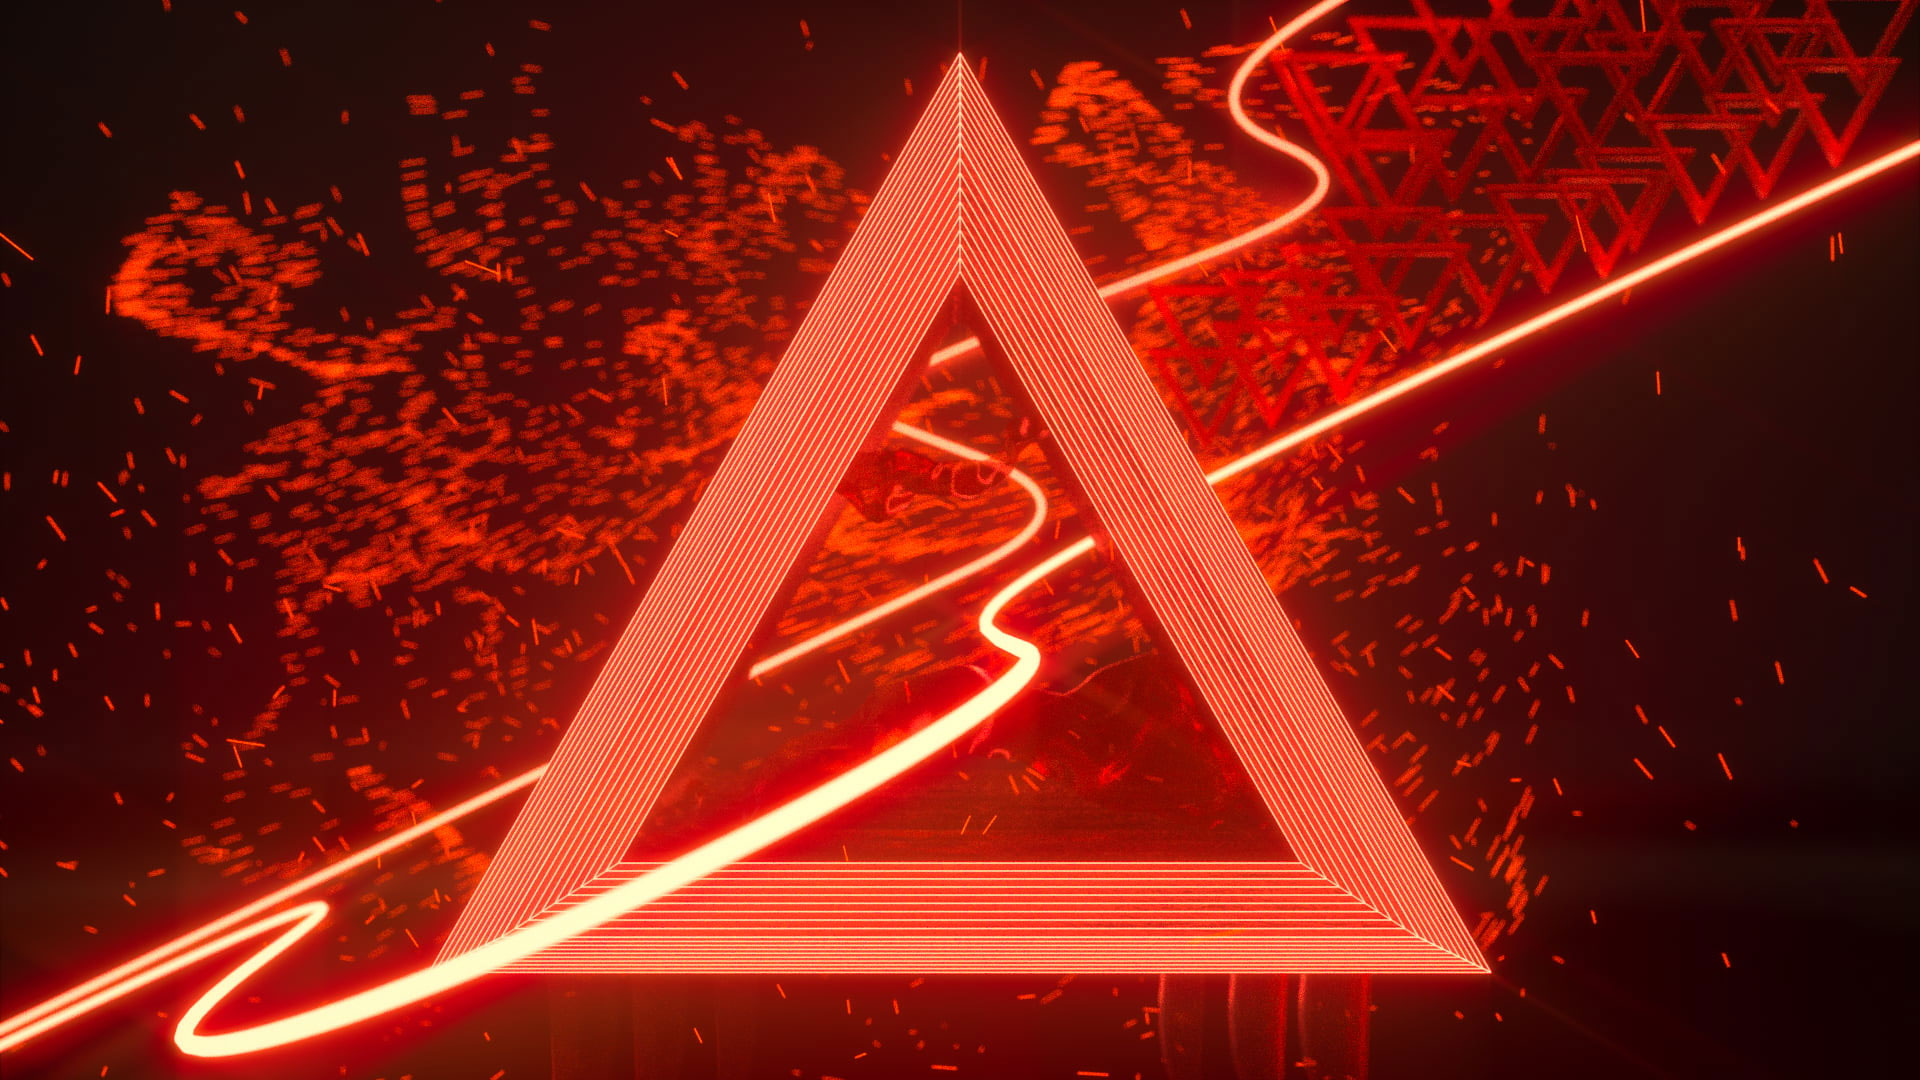 Wallpaper Neon, Red, Line Art, Lines, Triangle, Floating